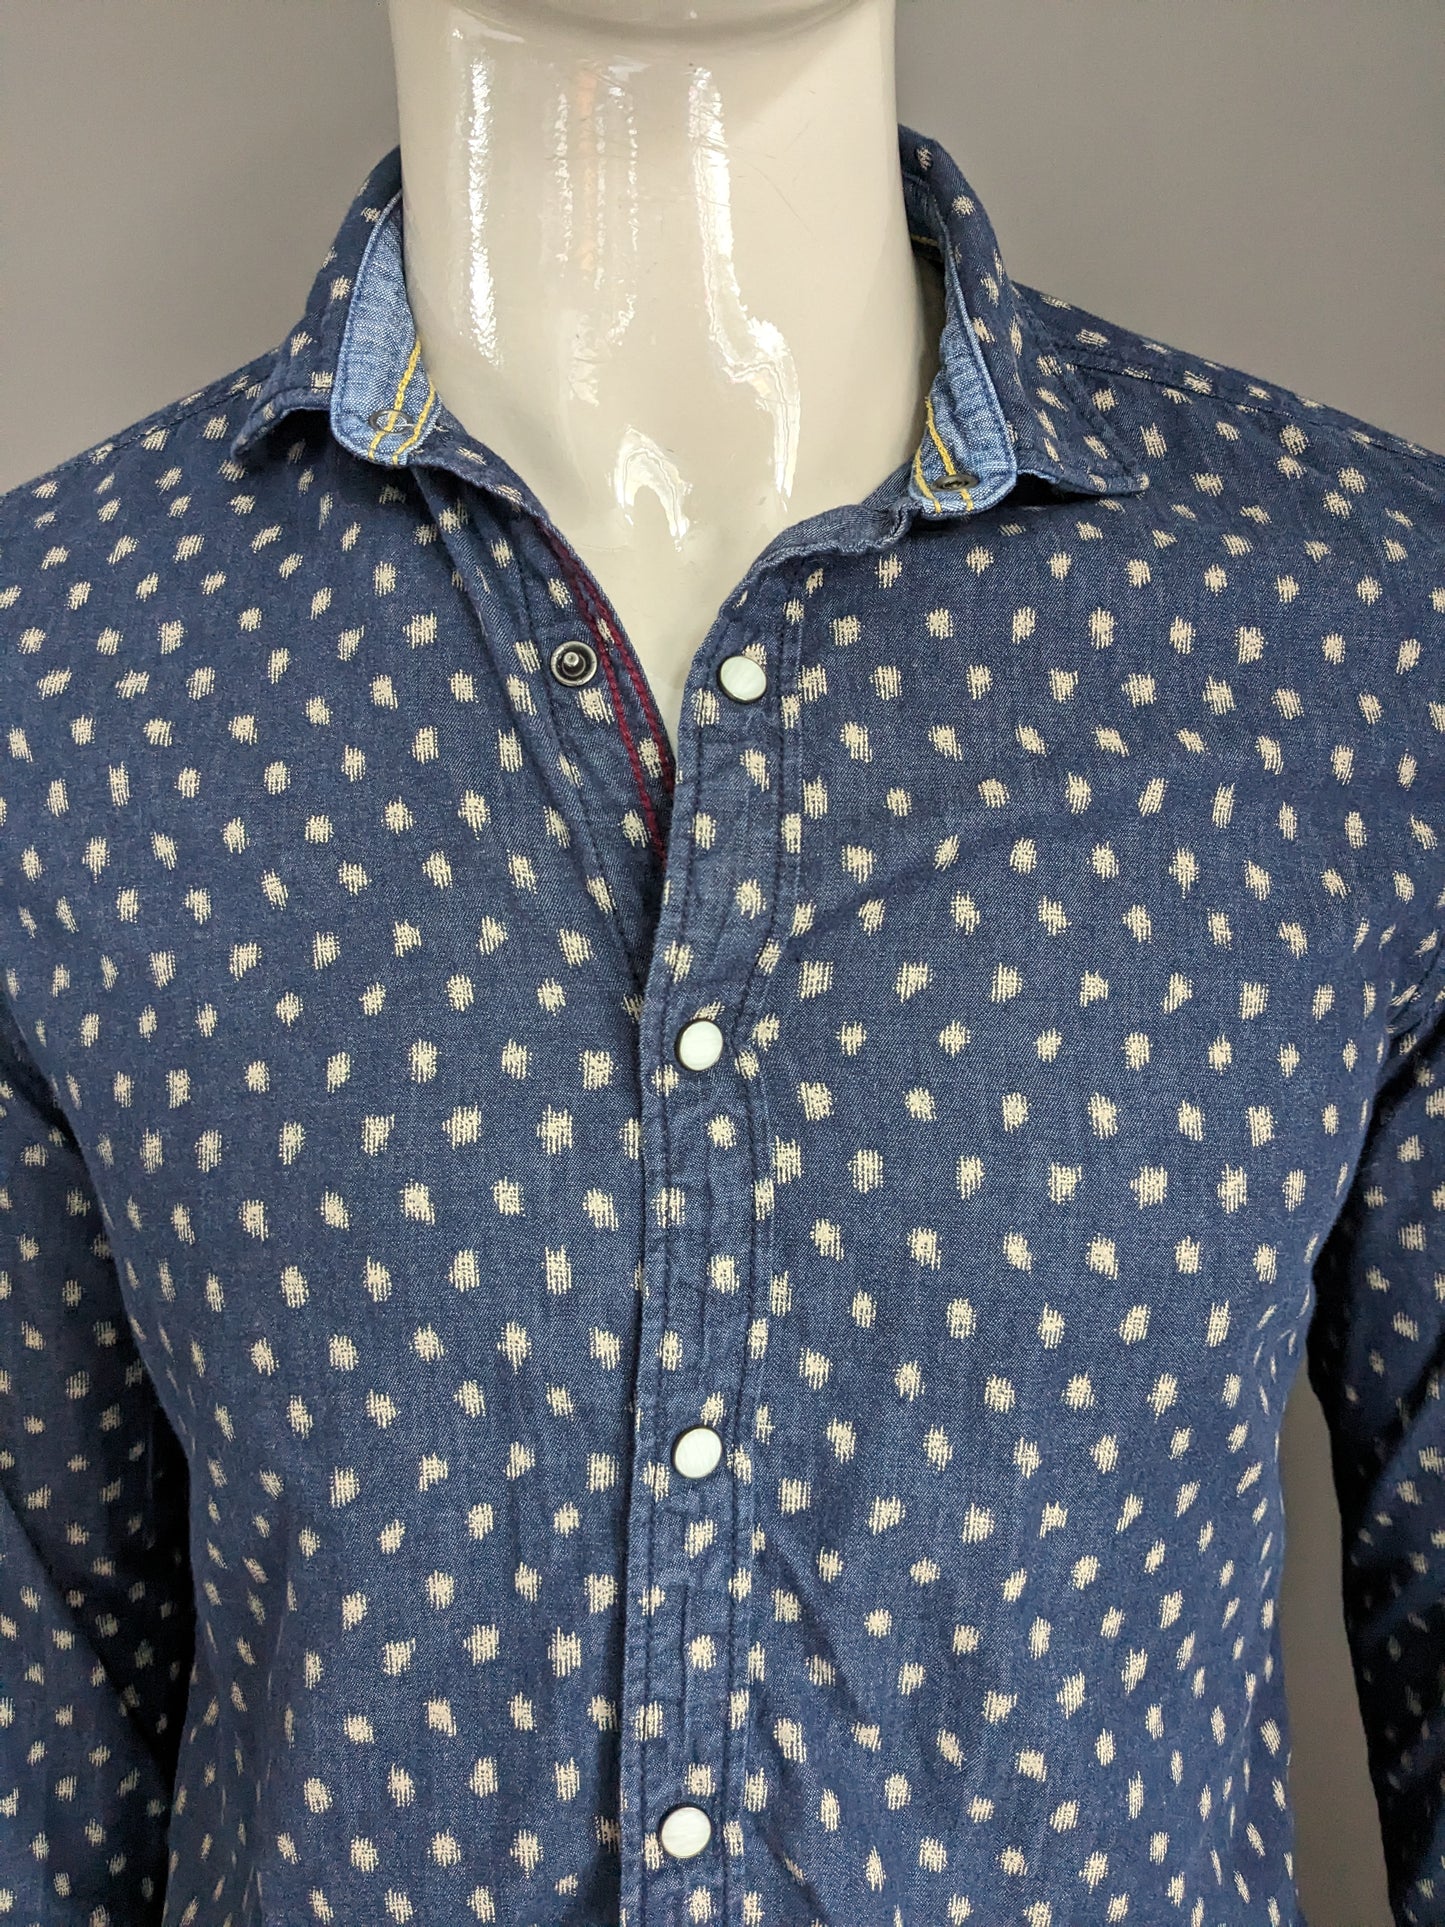 s.Oliver shirt with press studs. Blue gray print. Size M. Slim